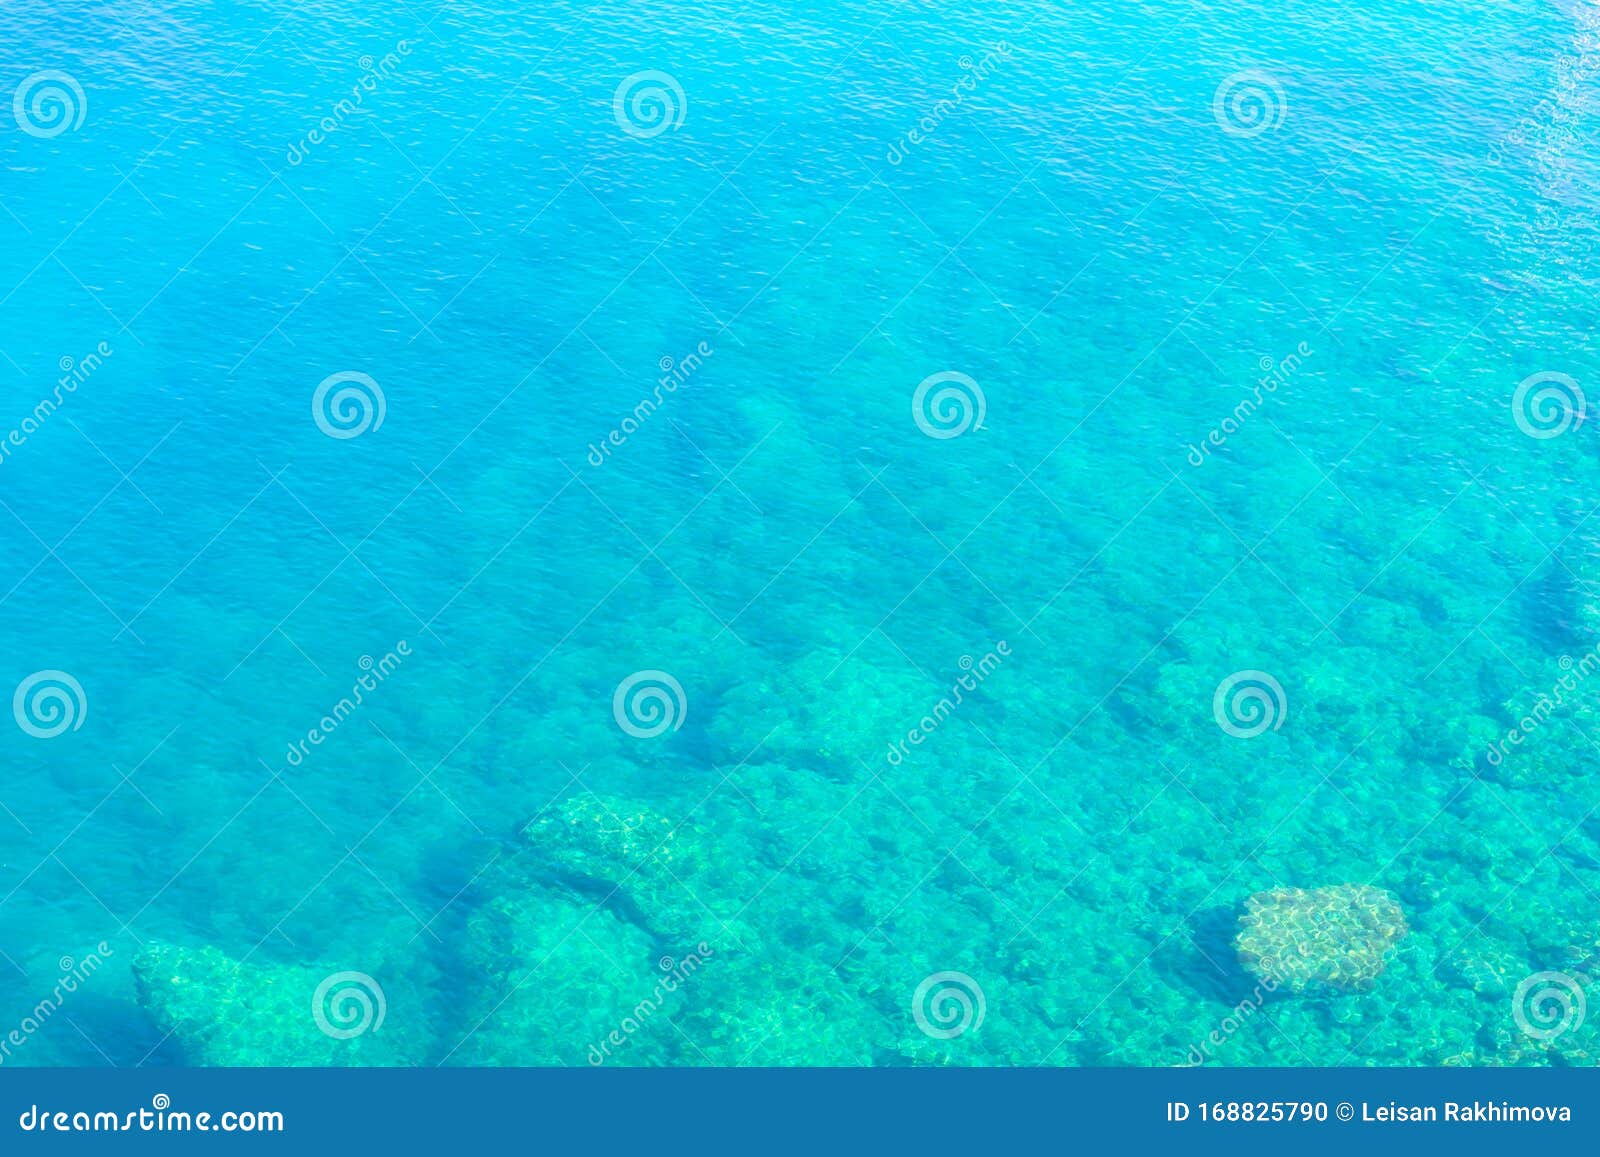 background made of clean transparent blue water sea surface. mediterranian sea surface on sunny day with waves and flares.